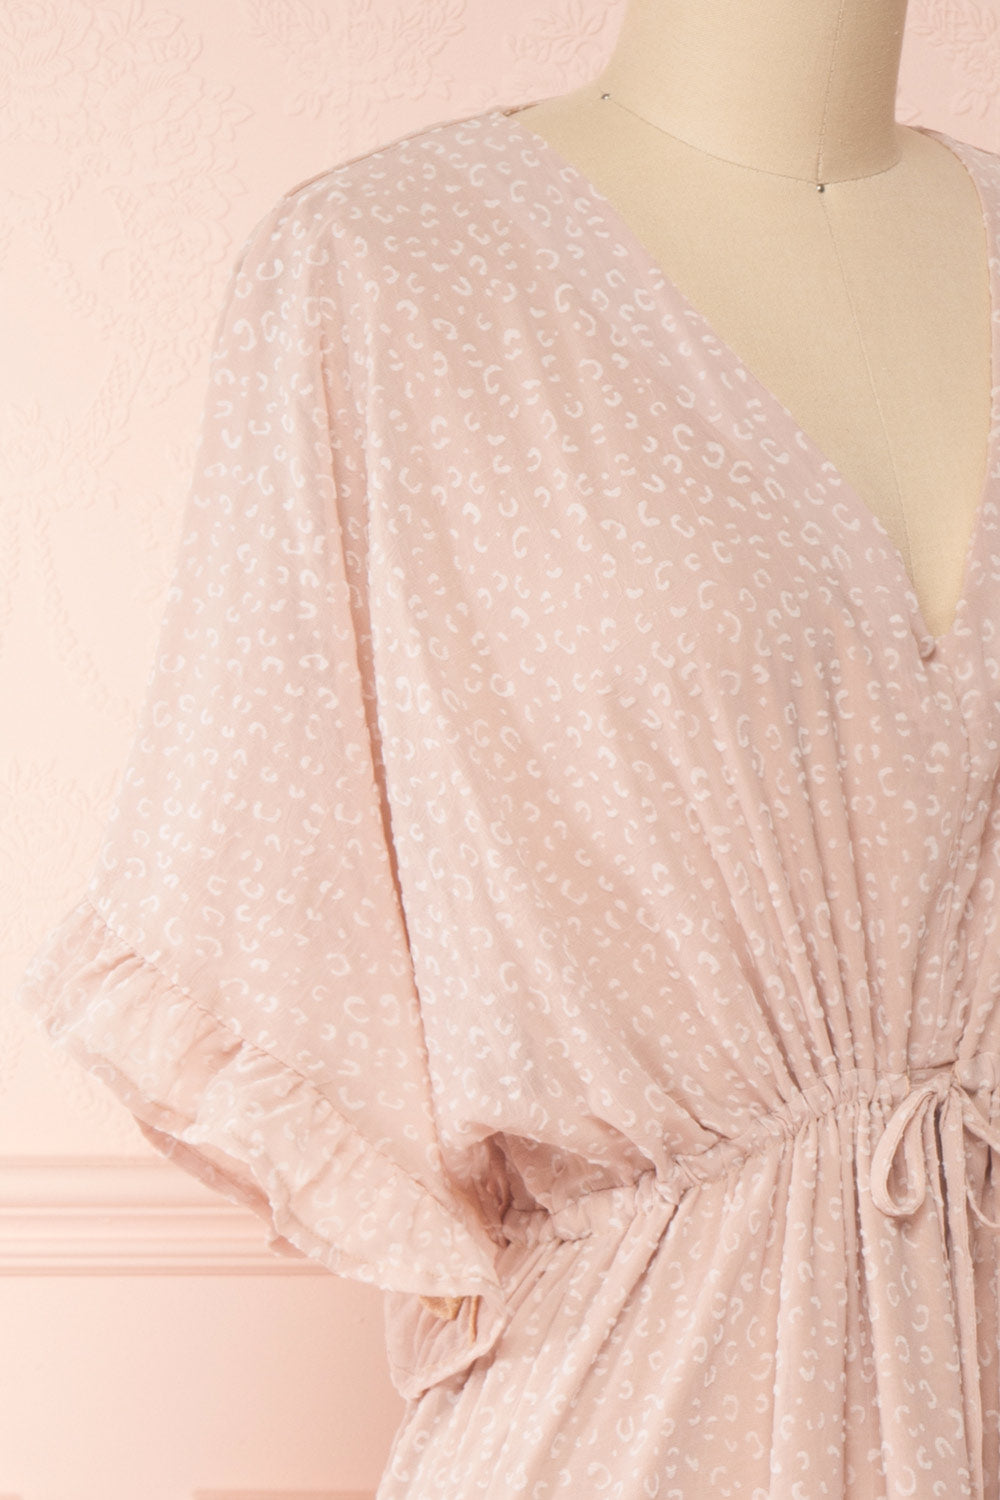 Odyssee Light Pink Patterned Maxi Dress | Boutique 1861 side close-up